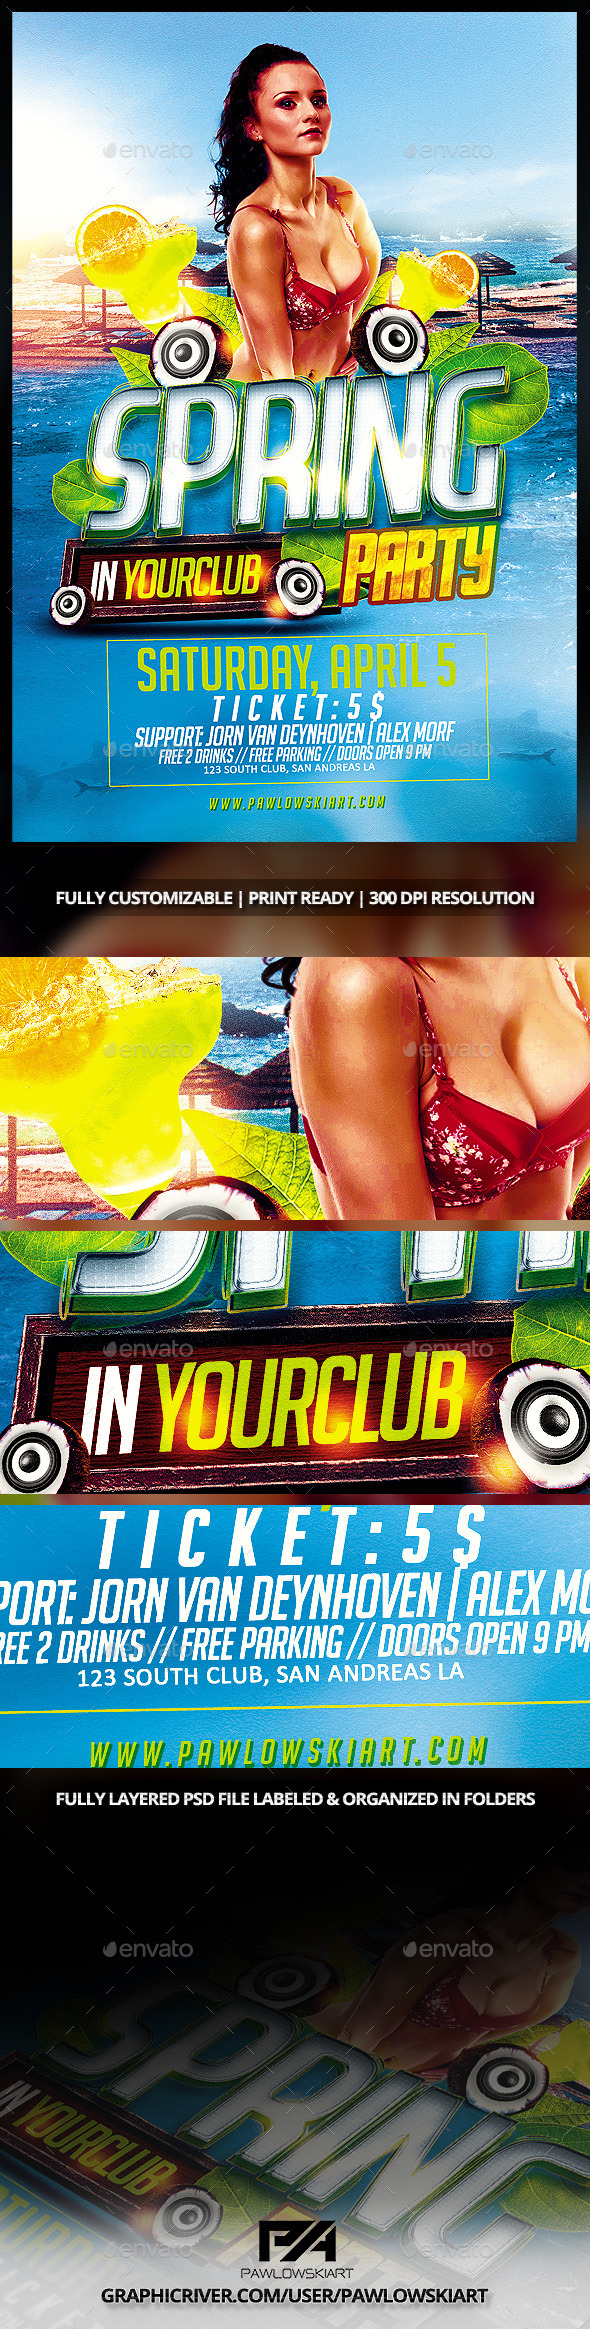 Spring Party Flyer PSD Template